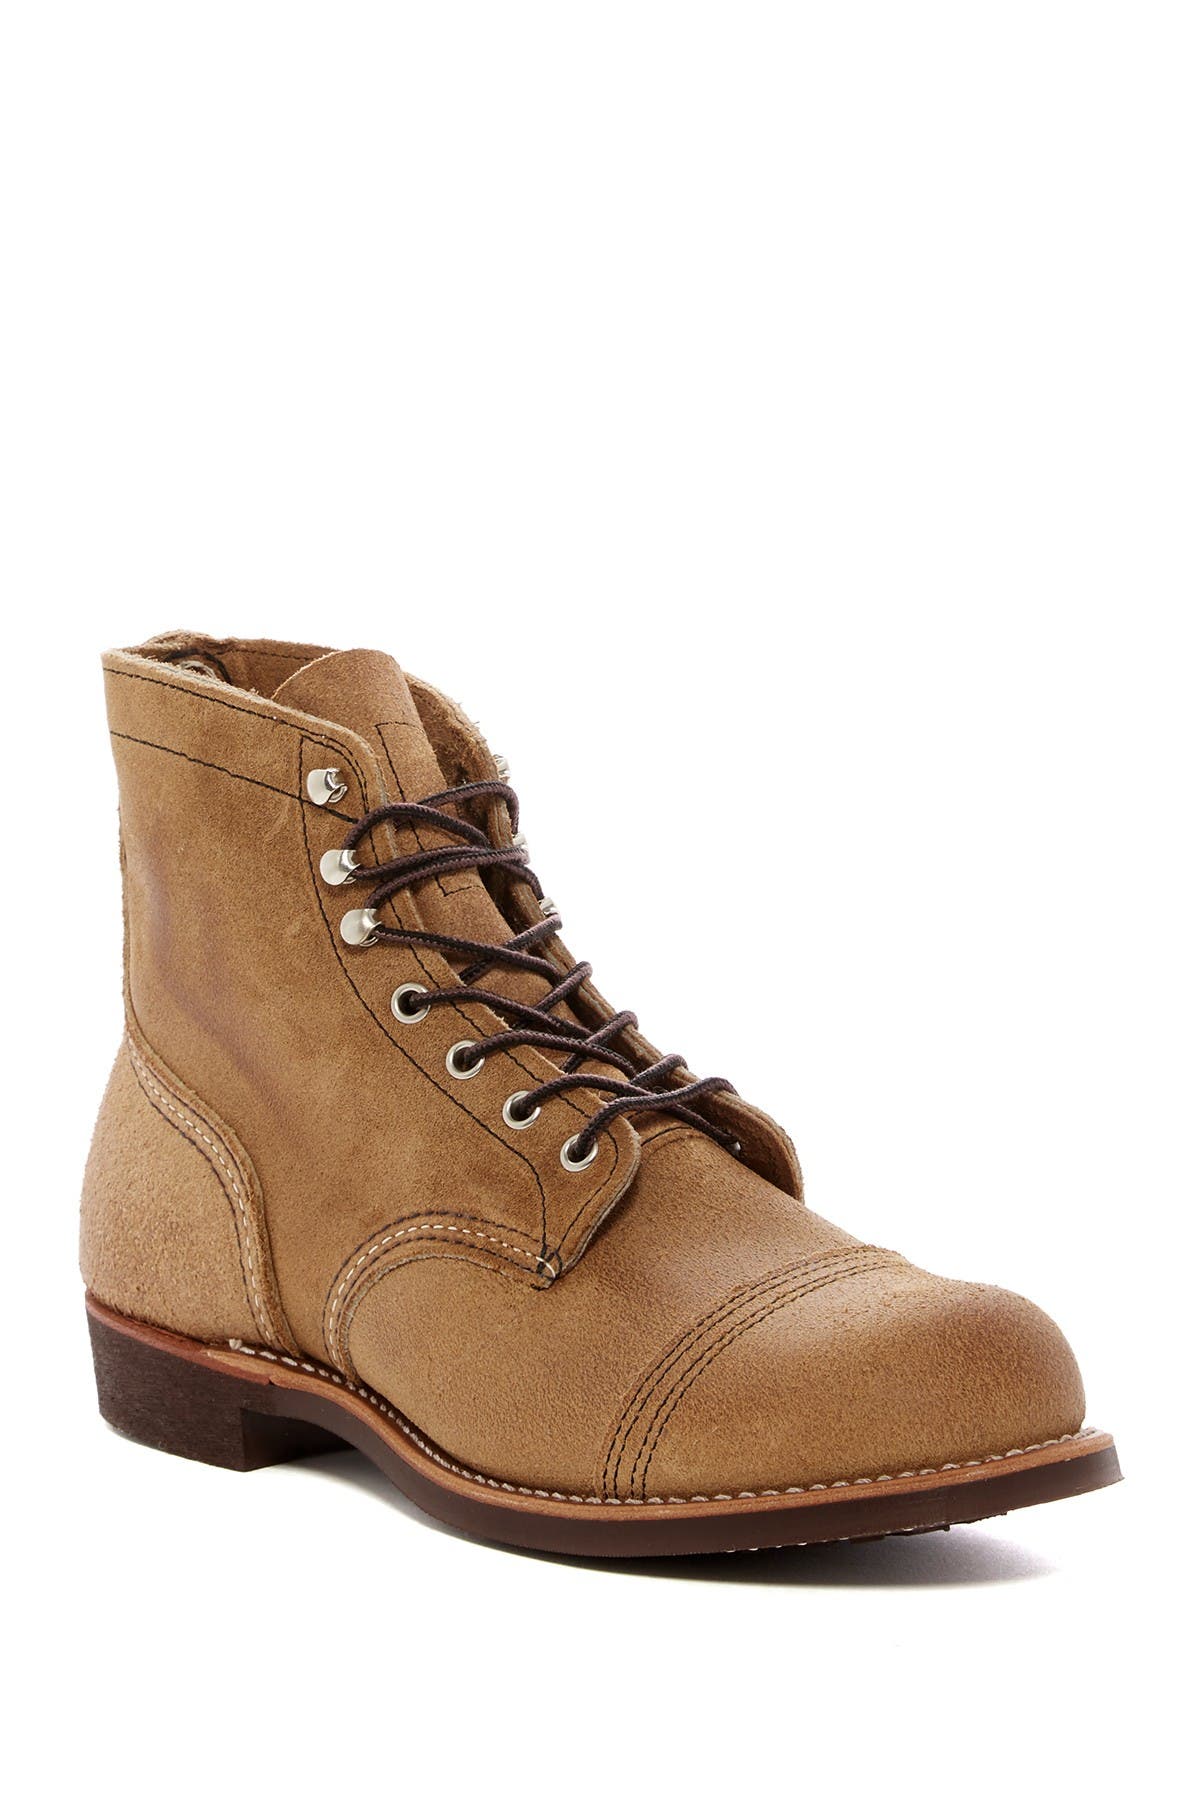 red wing iron ranger suede